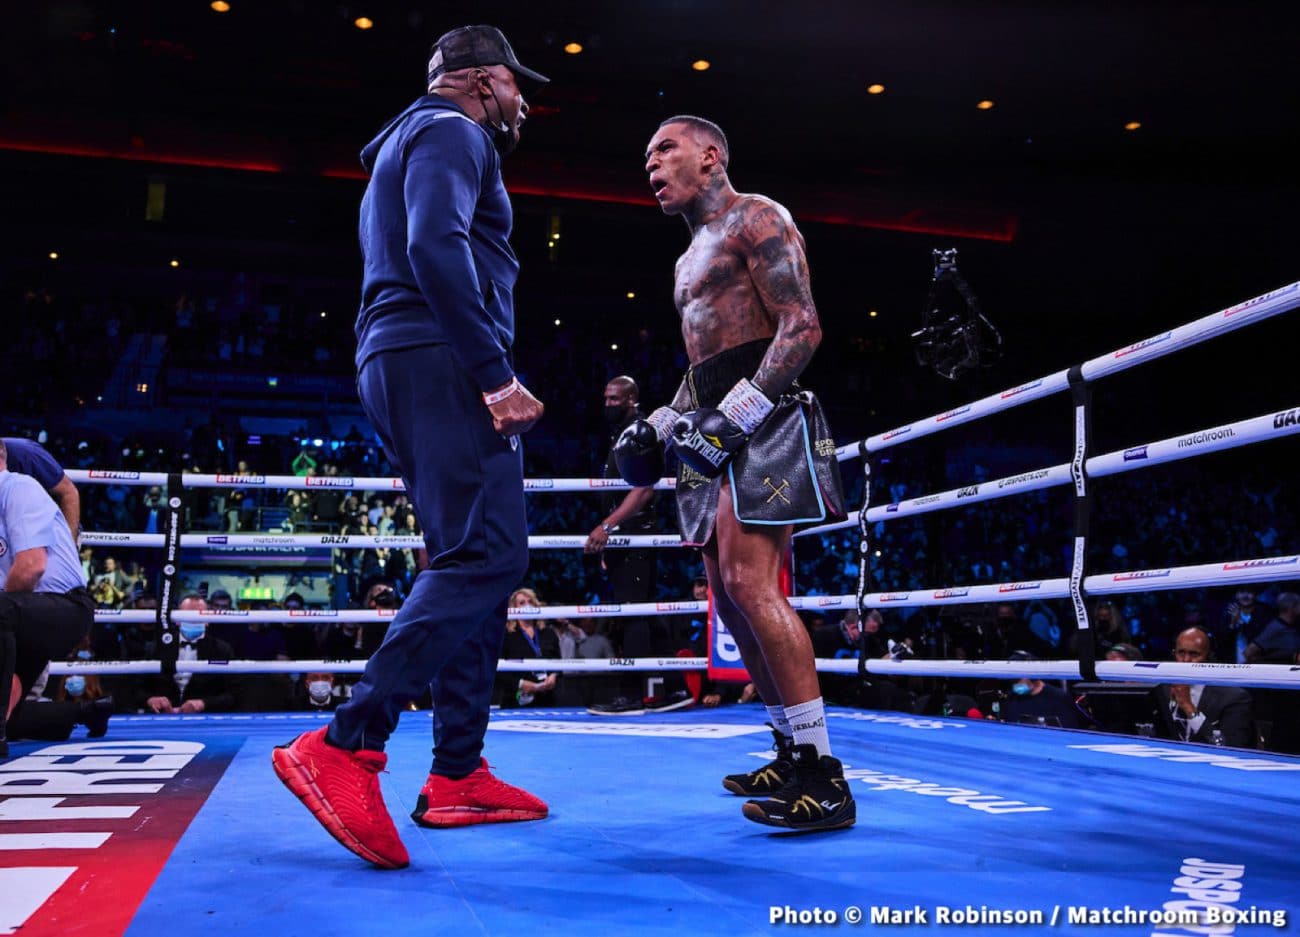 Image: Conor Benn to fight Robert Guerrero or Maurice Hooker next says Eddie Hearn